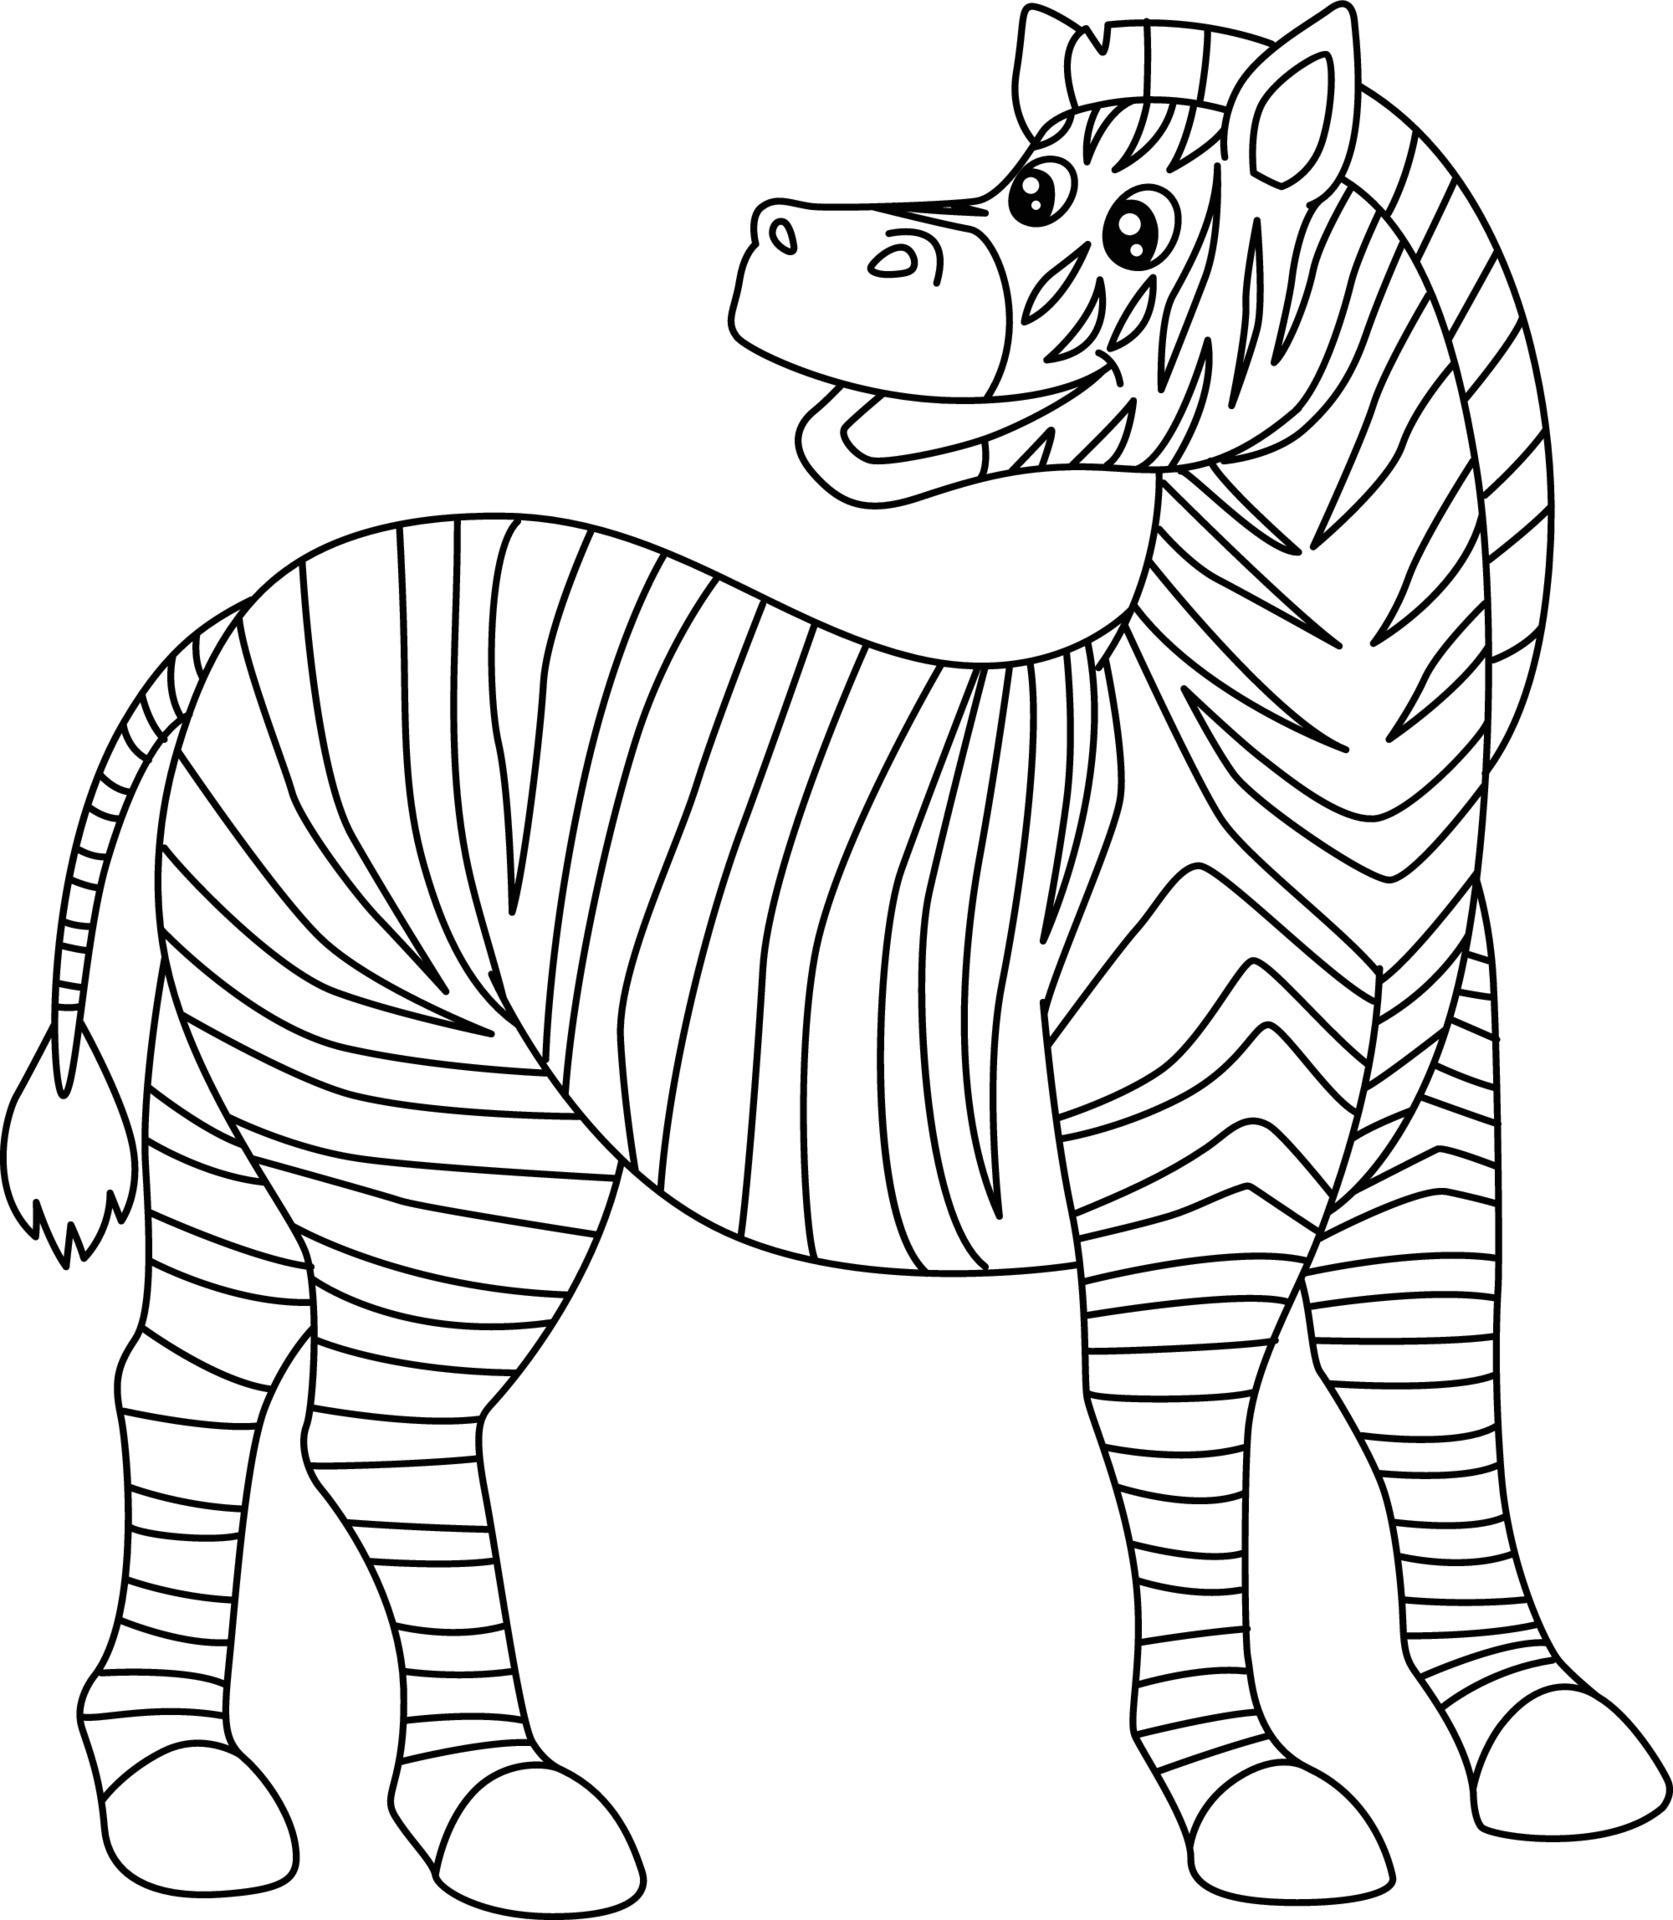 Innovative zebra coloring book for 3-4 year olds